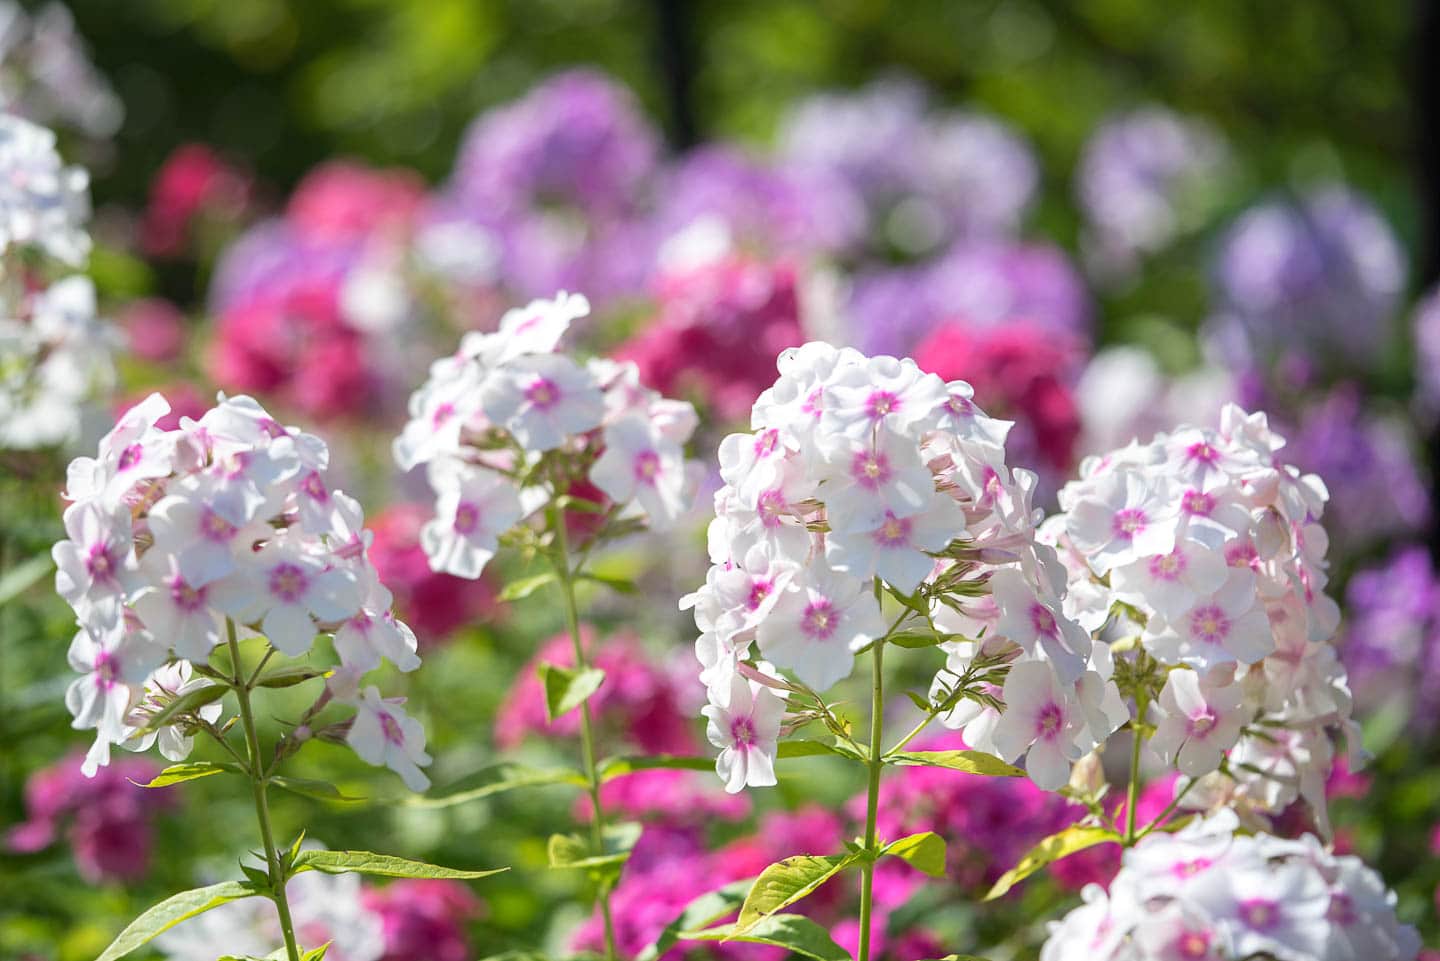 Close up of long blooming garden phlox with white and pink flowers